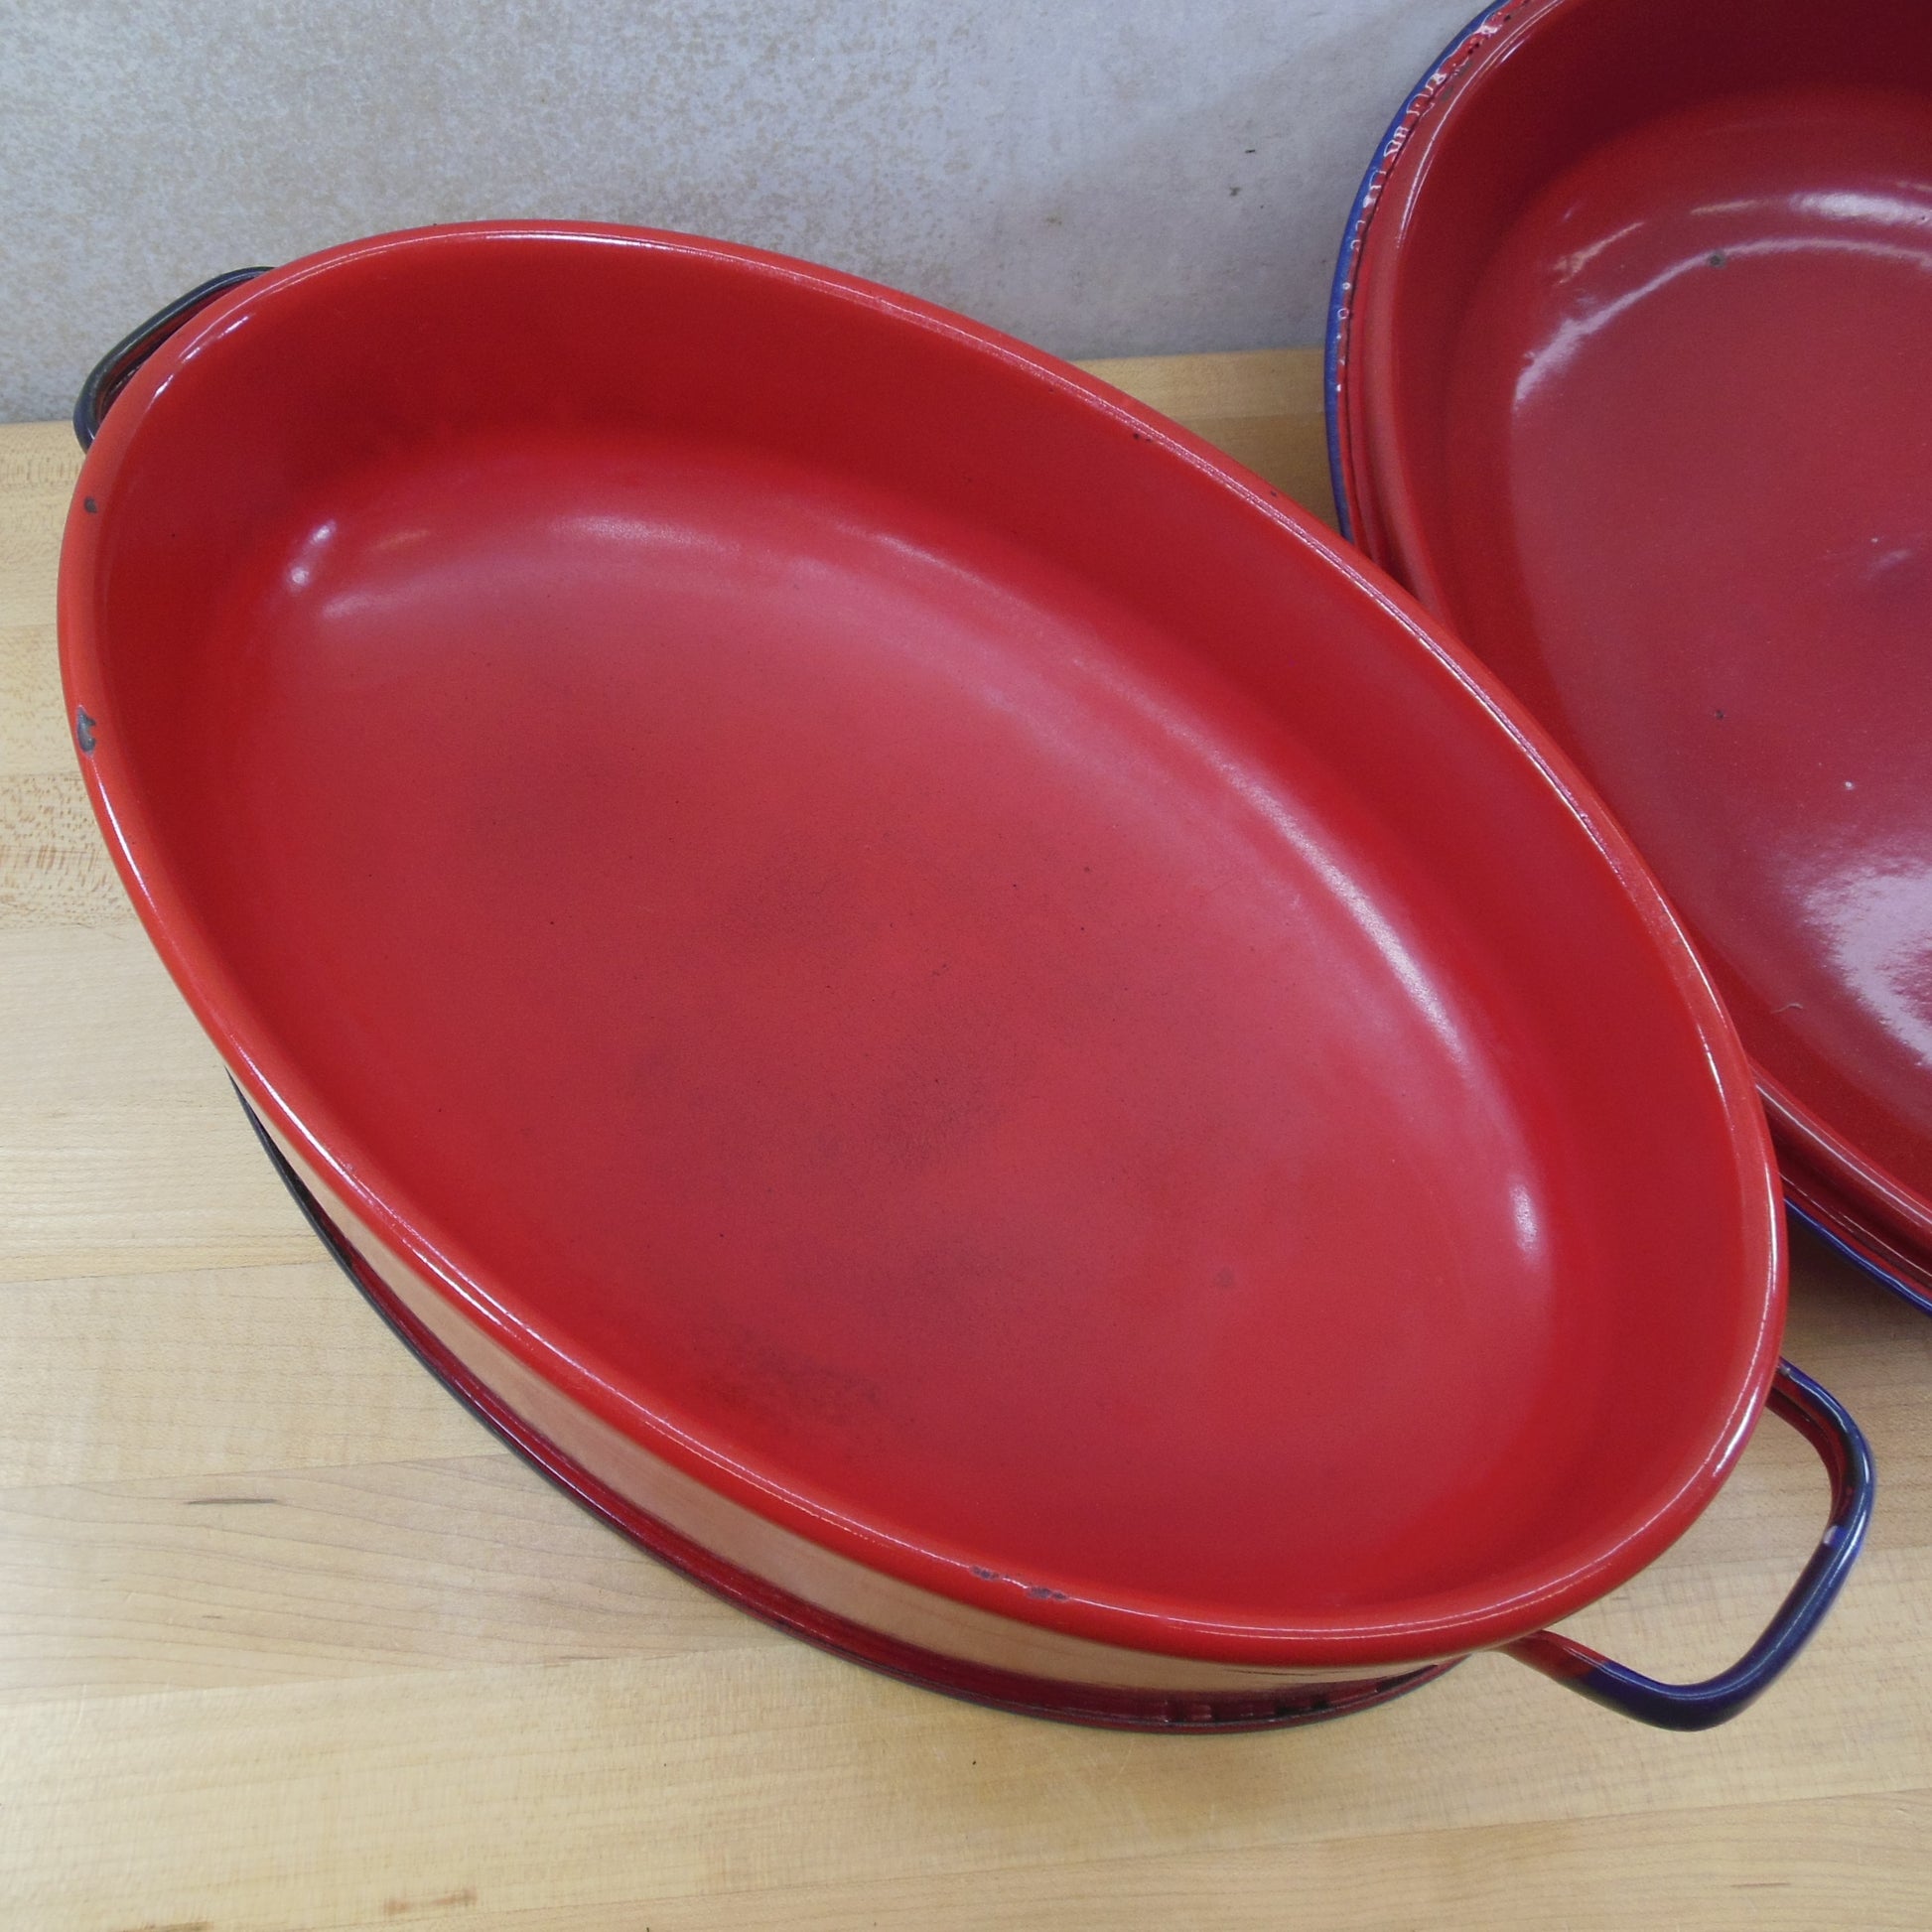 Unbranded Red Blue Trim Rim Enamelware Oval Roaster Pot double wall